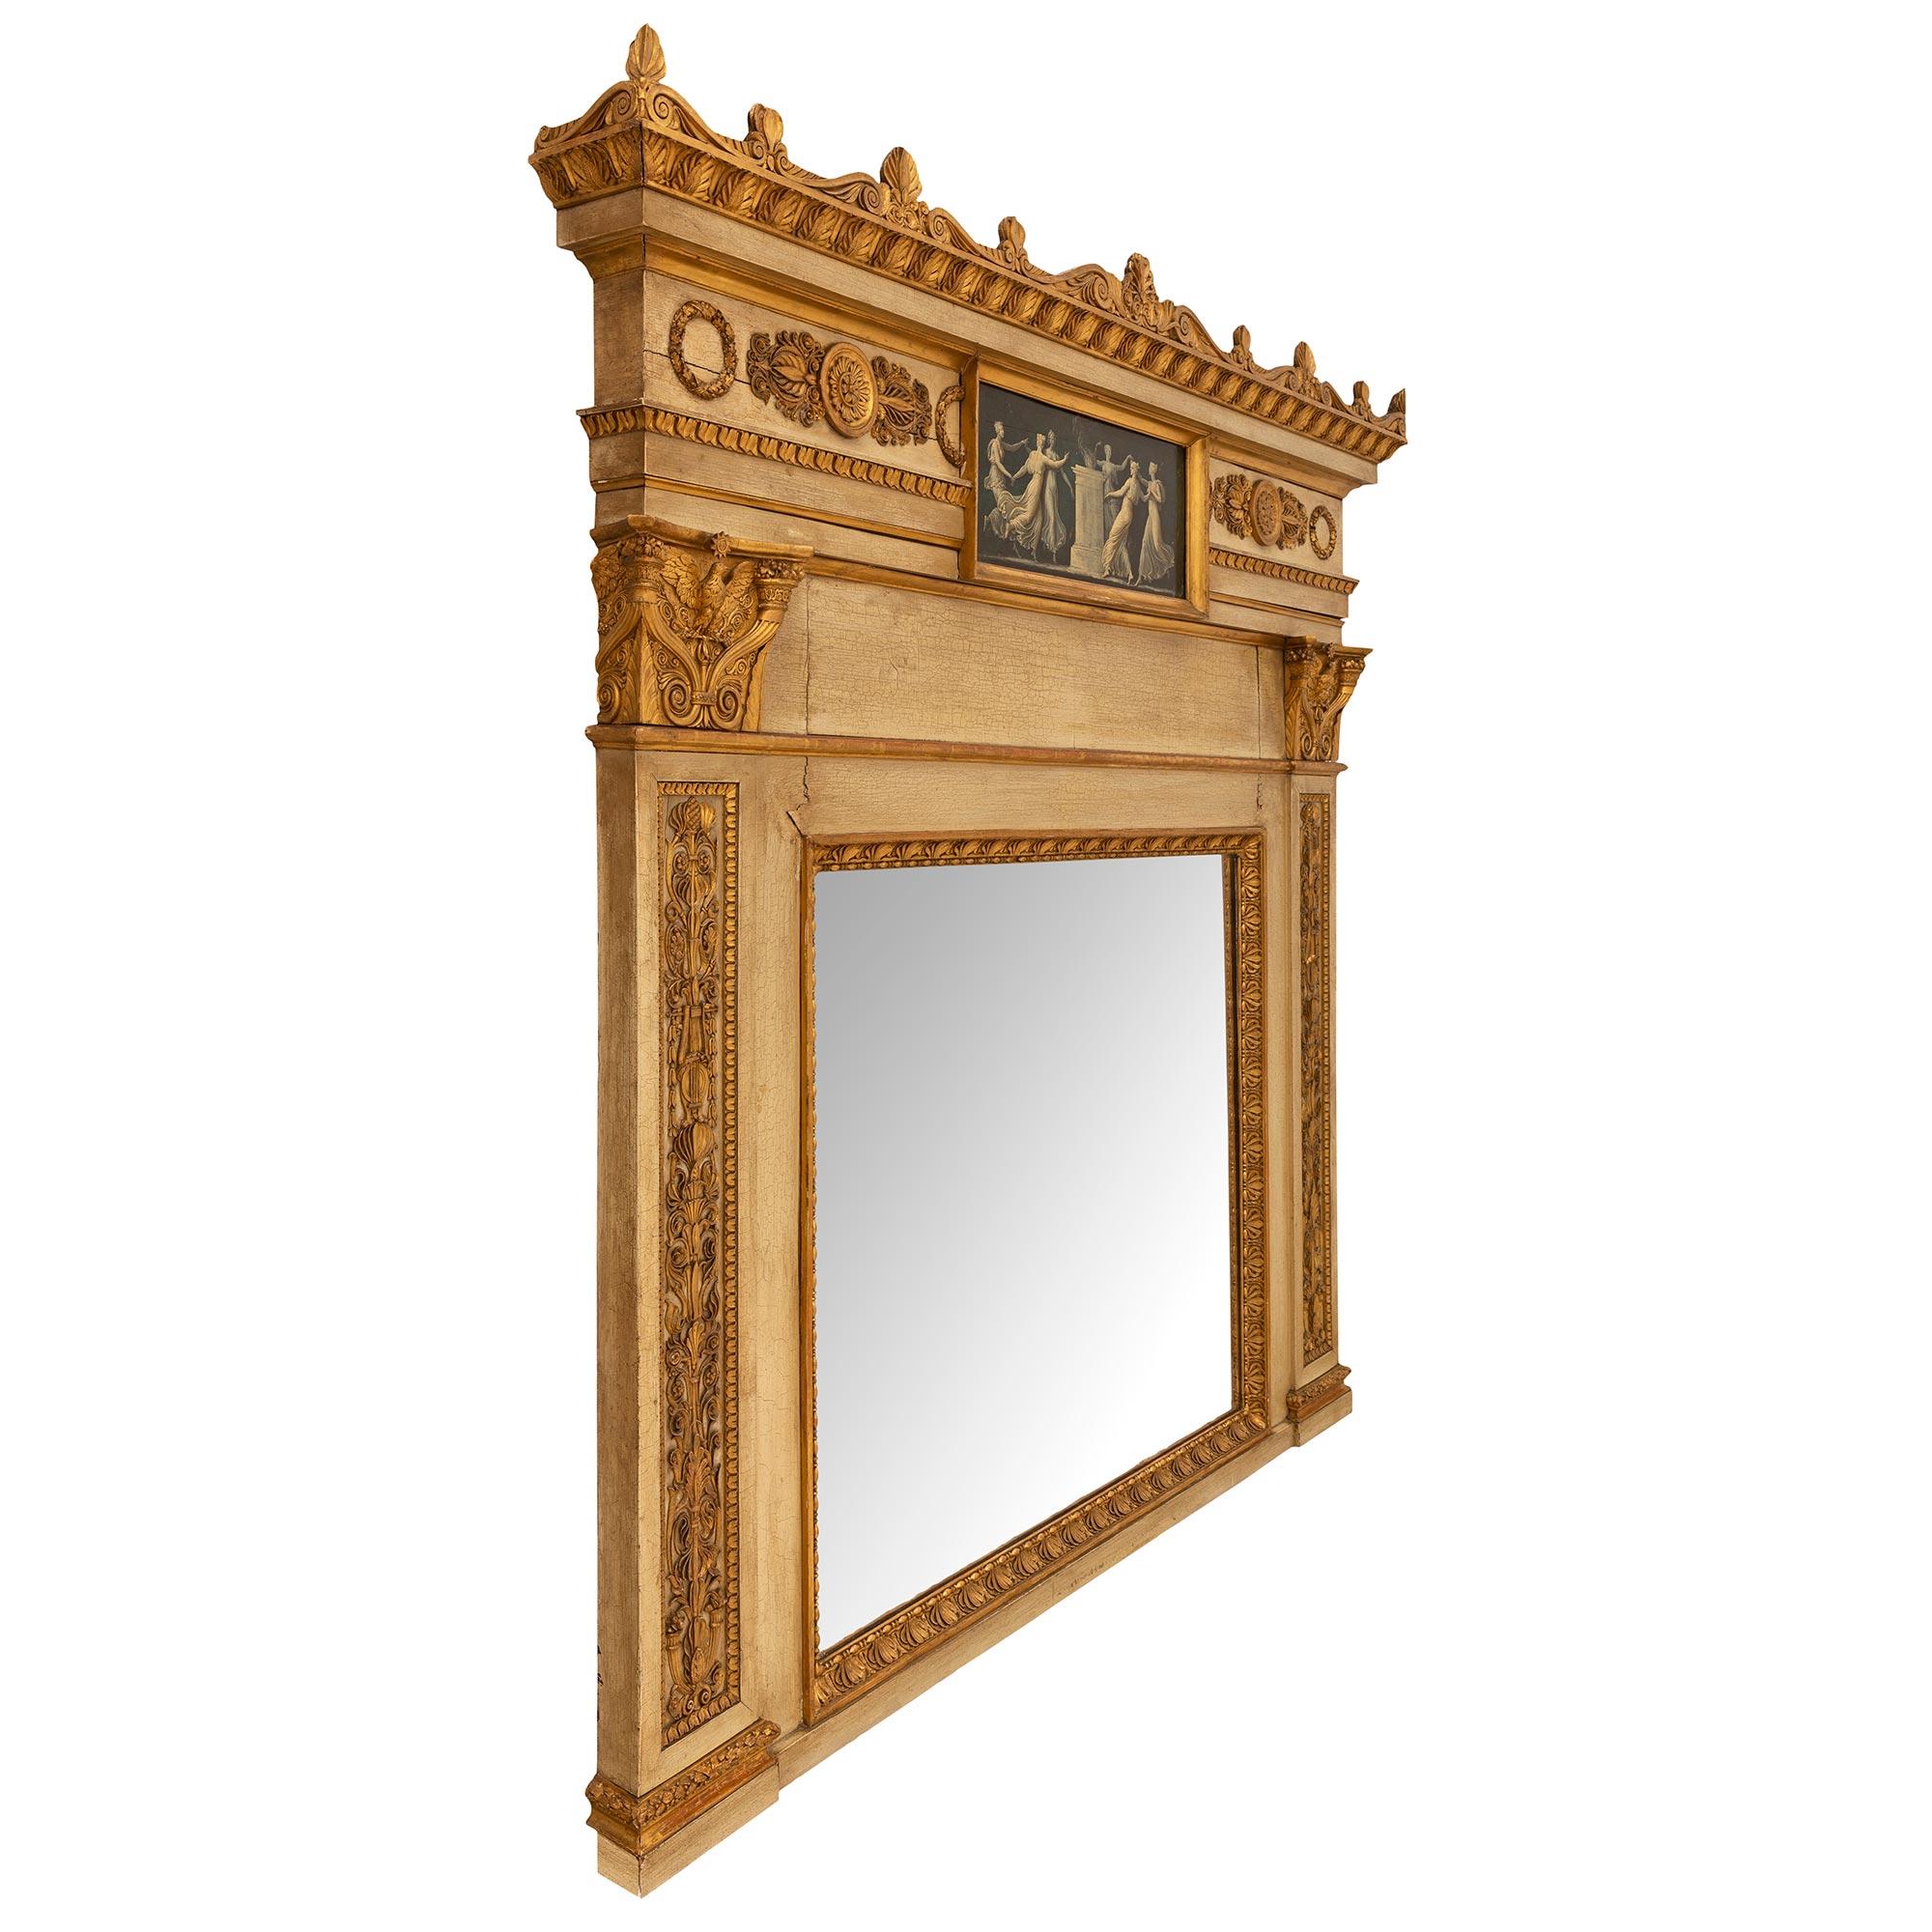 A striking and most elegant Italian 19th century Neo-Classical st. patinated and giltwood trumeau mirror. The trumeau retains its original mirror plate set within a striking richly carved giltwood palmette and mottled designed band. Impressive